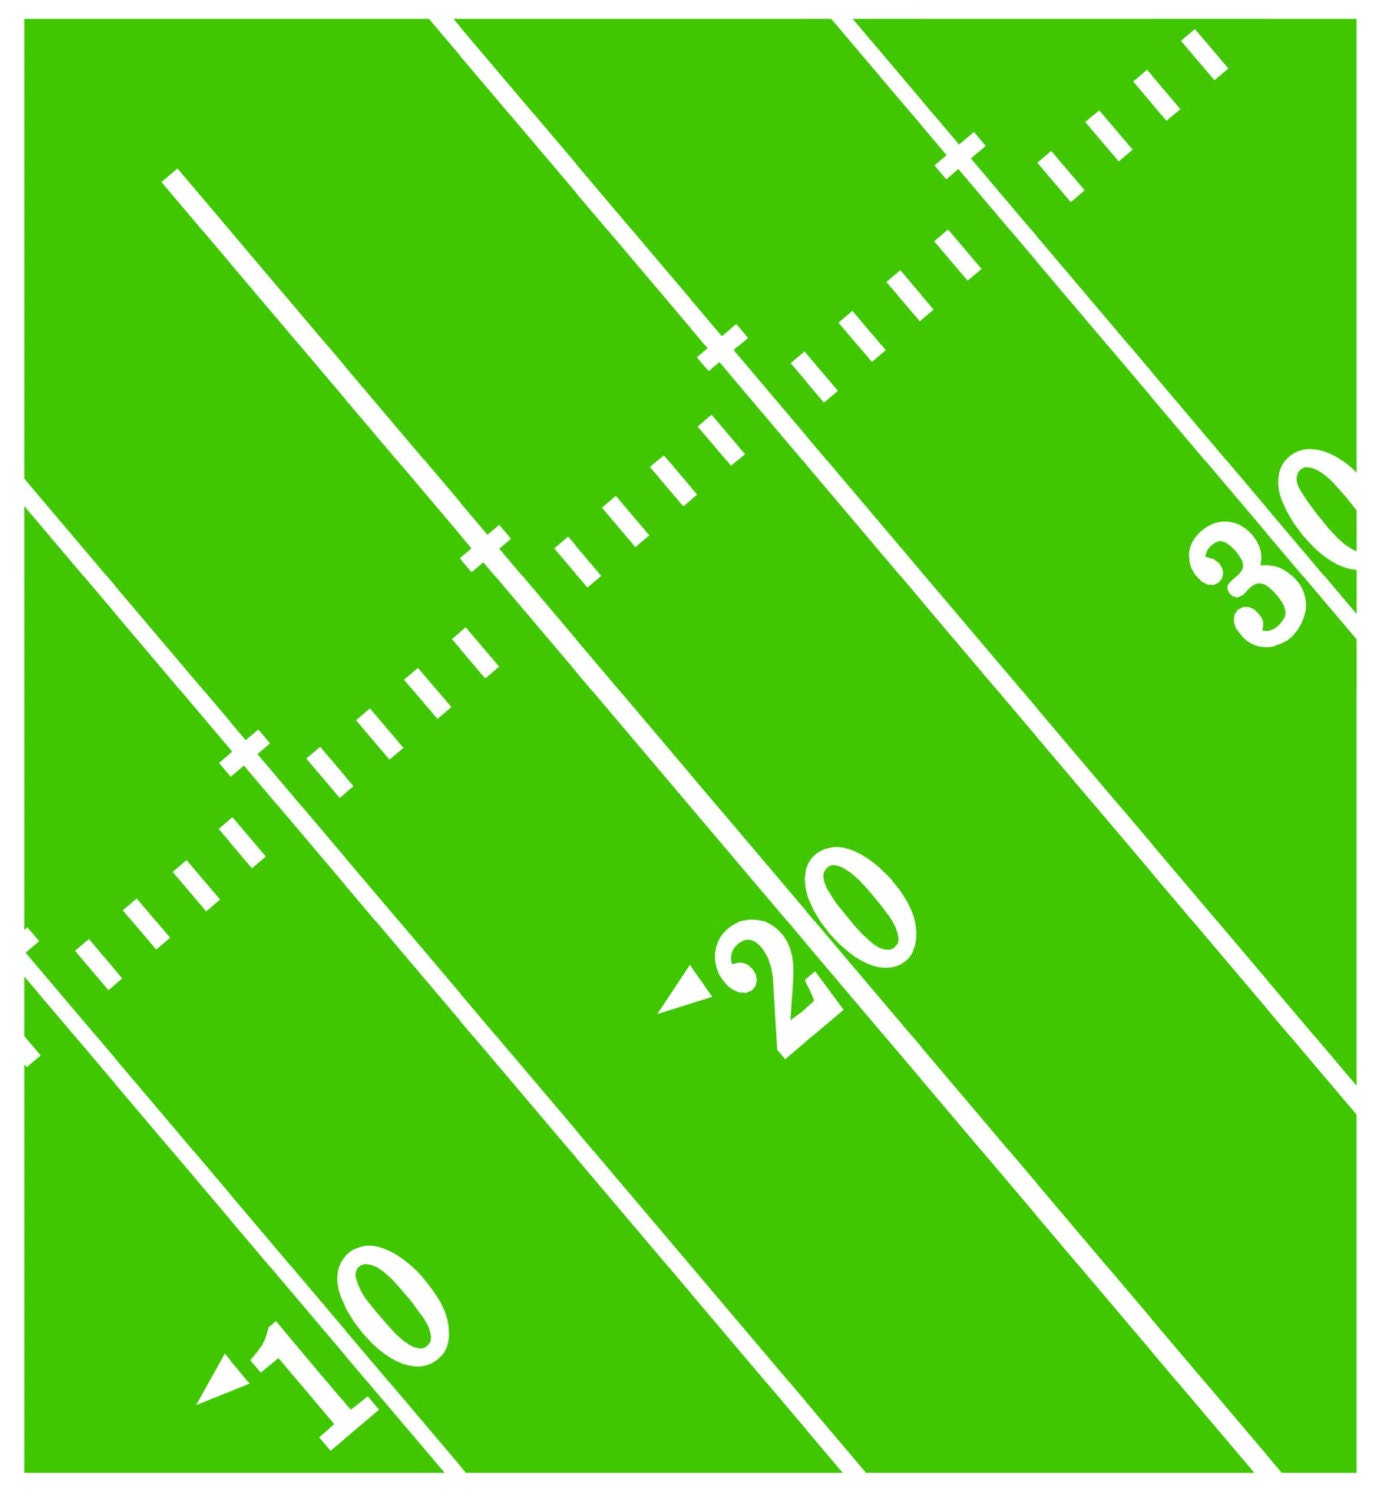 Download Partial Football Field - .SVG cut file - Instant Download ...